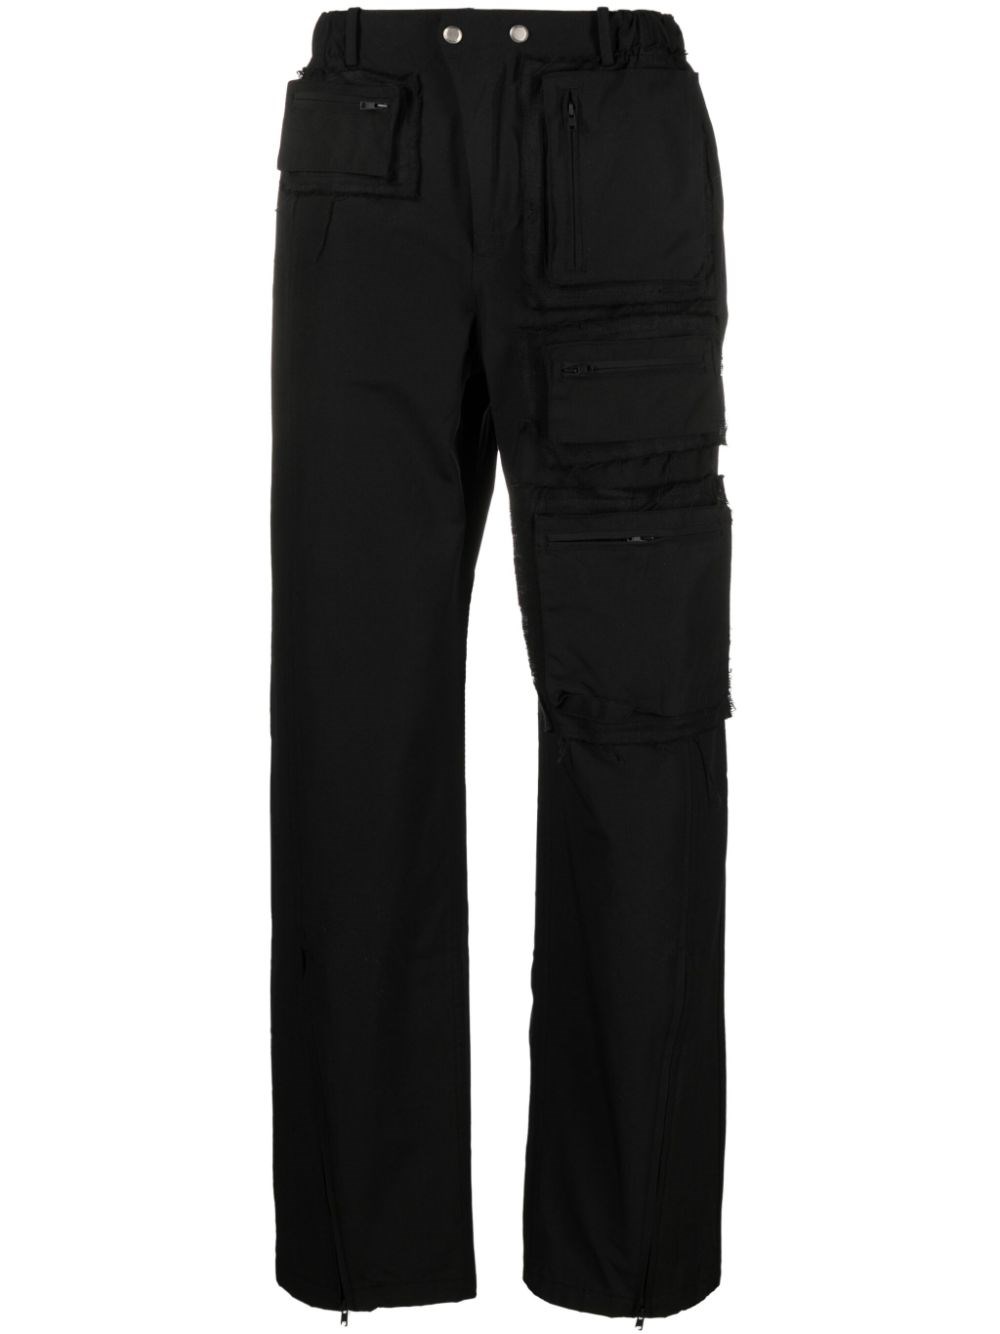 ANDERSSON BELL RAW EDGE MULTI-POCKET trousers